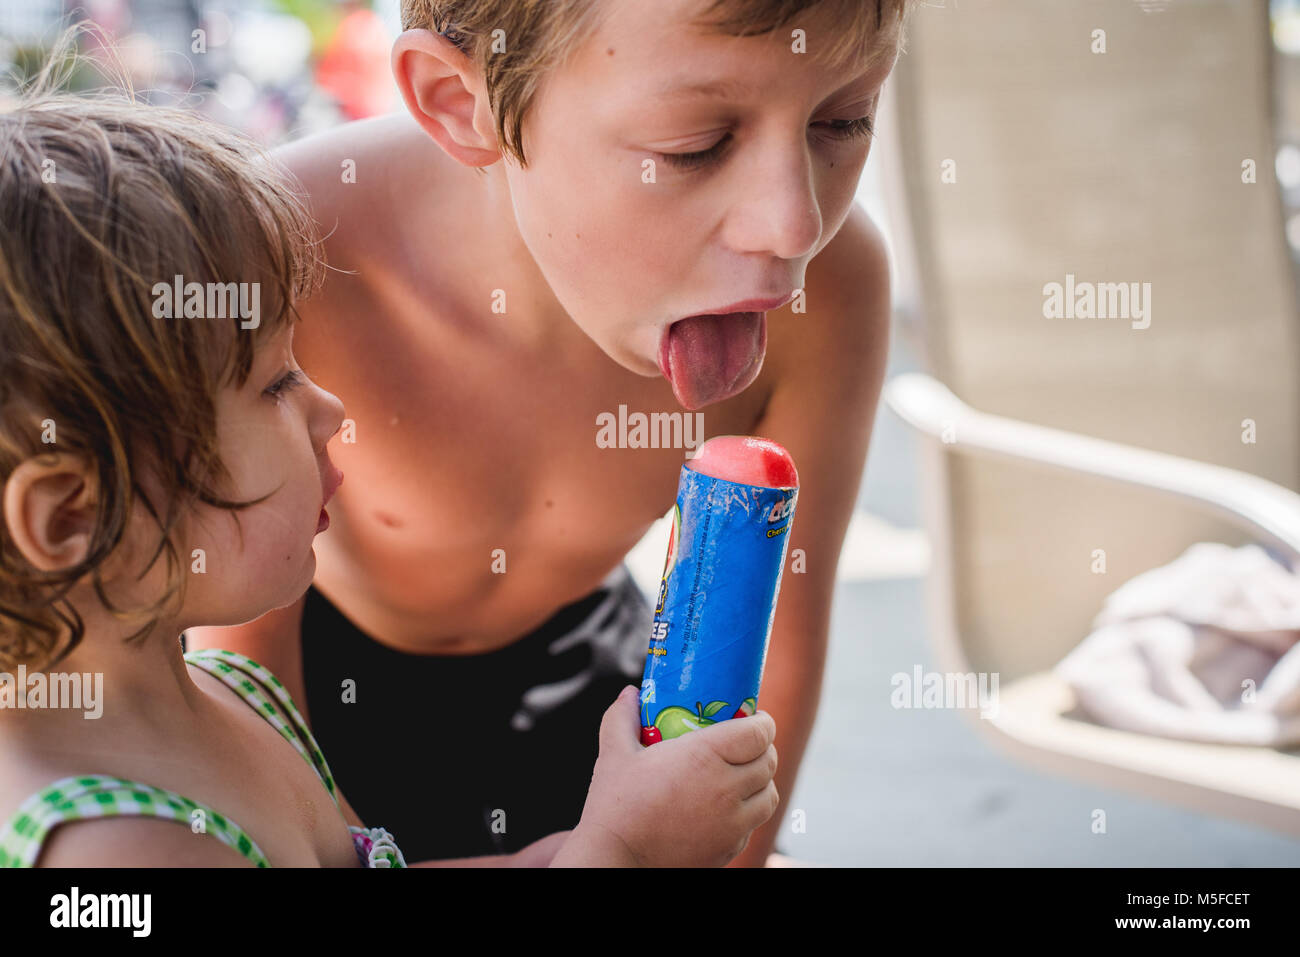 A young boy takes a lick from a push up ice cream being held by a toddler girl during the summer. Stock Photo